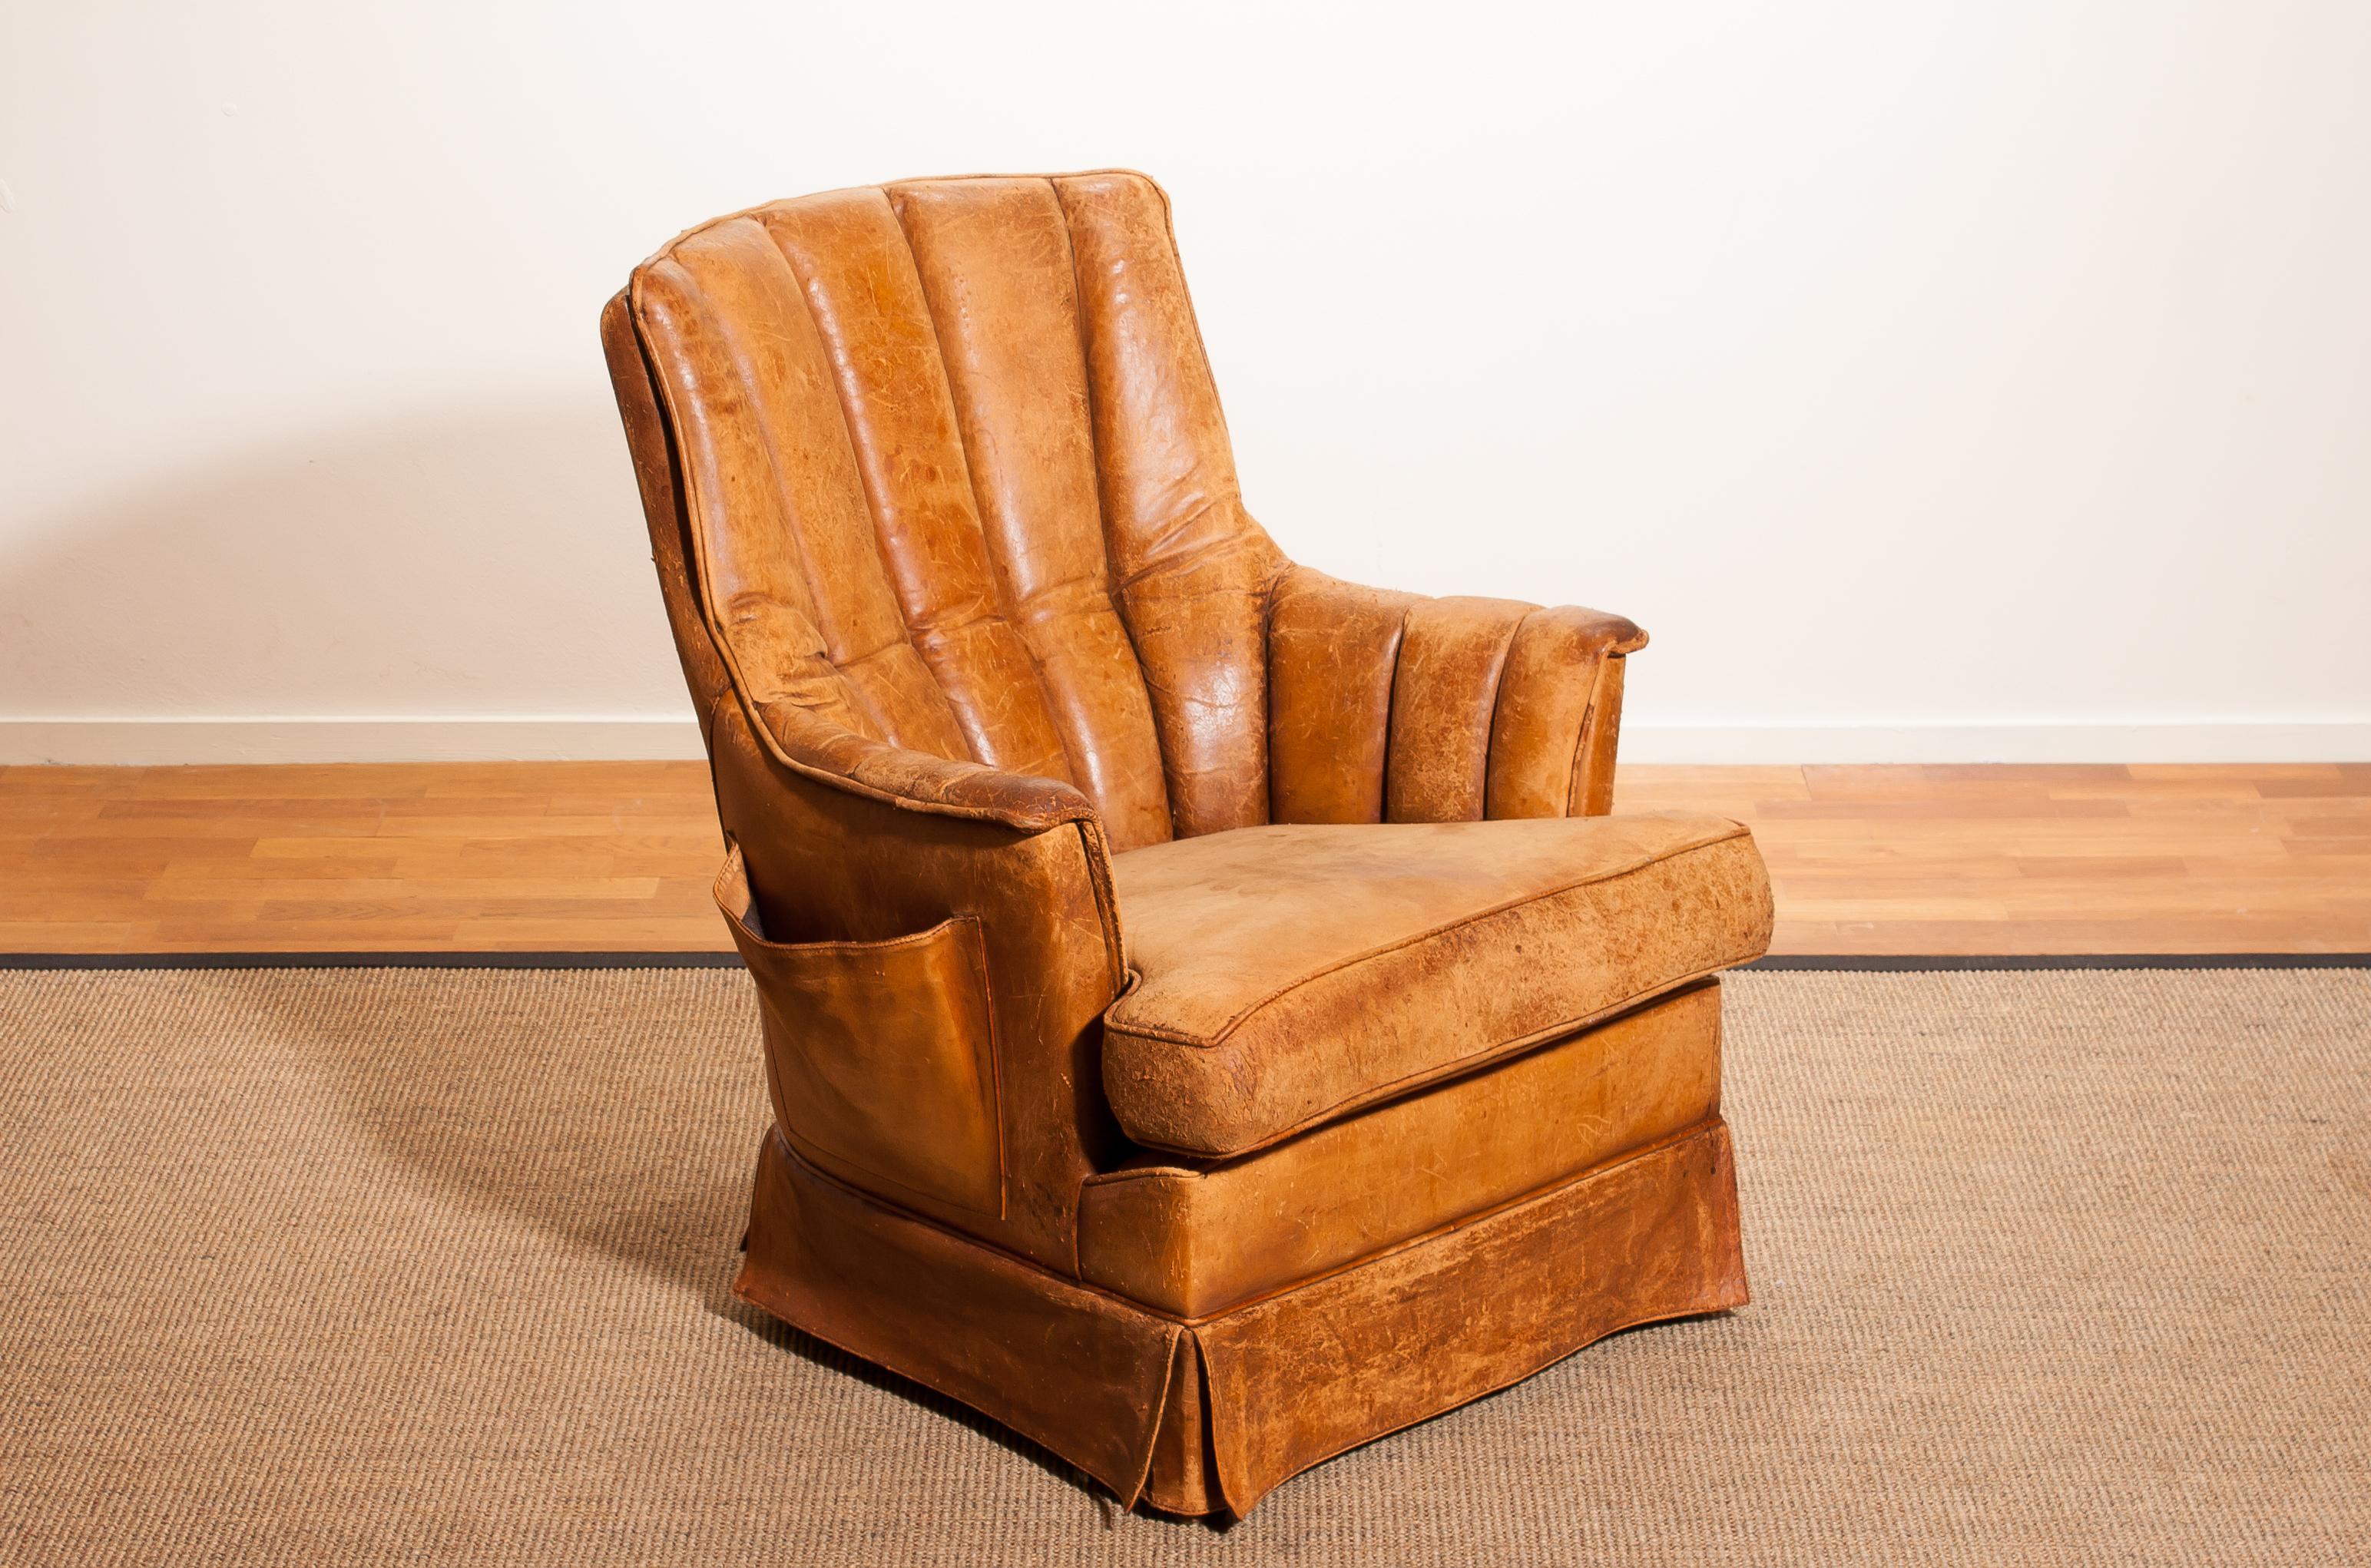 Fantastic club armchair from France.
This chair is made of sheep leather with a skirt and a magazine bag on its side.
It has a greatly used patina.
Period 1940s.
Dimensions: H 85 cm, W 75 cm, D 68 cm, SH 46 cm.